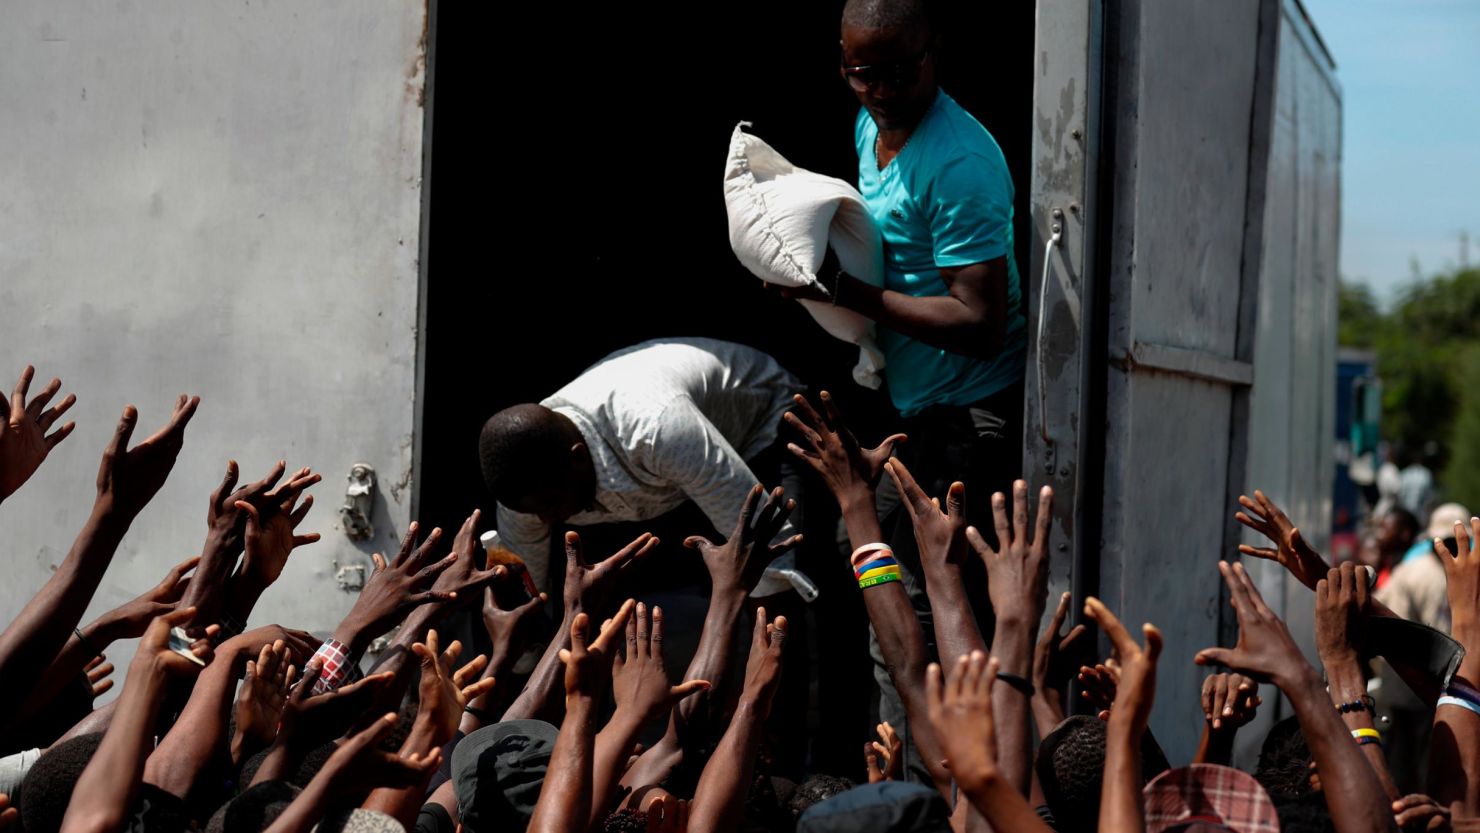 Food and school supplies are delivered to a Port-au-Prince neighborhood